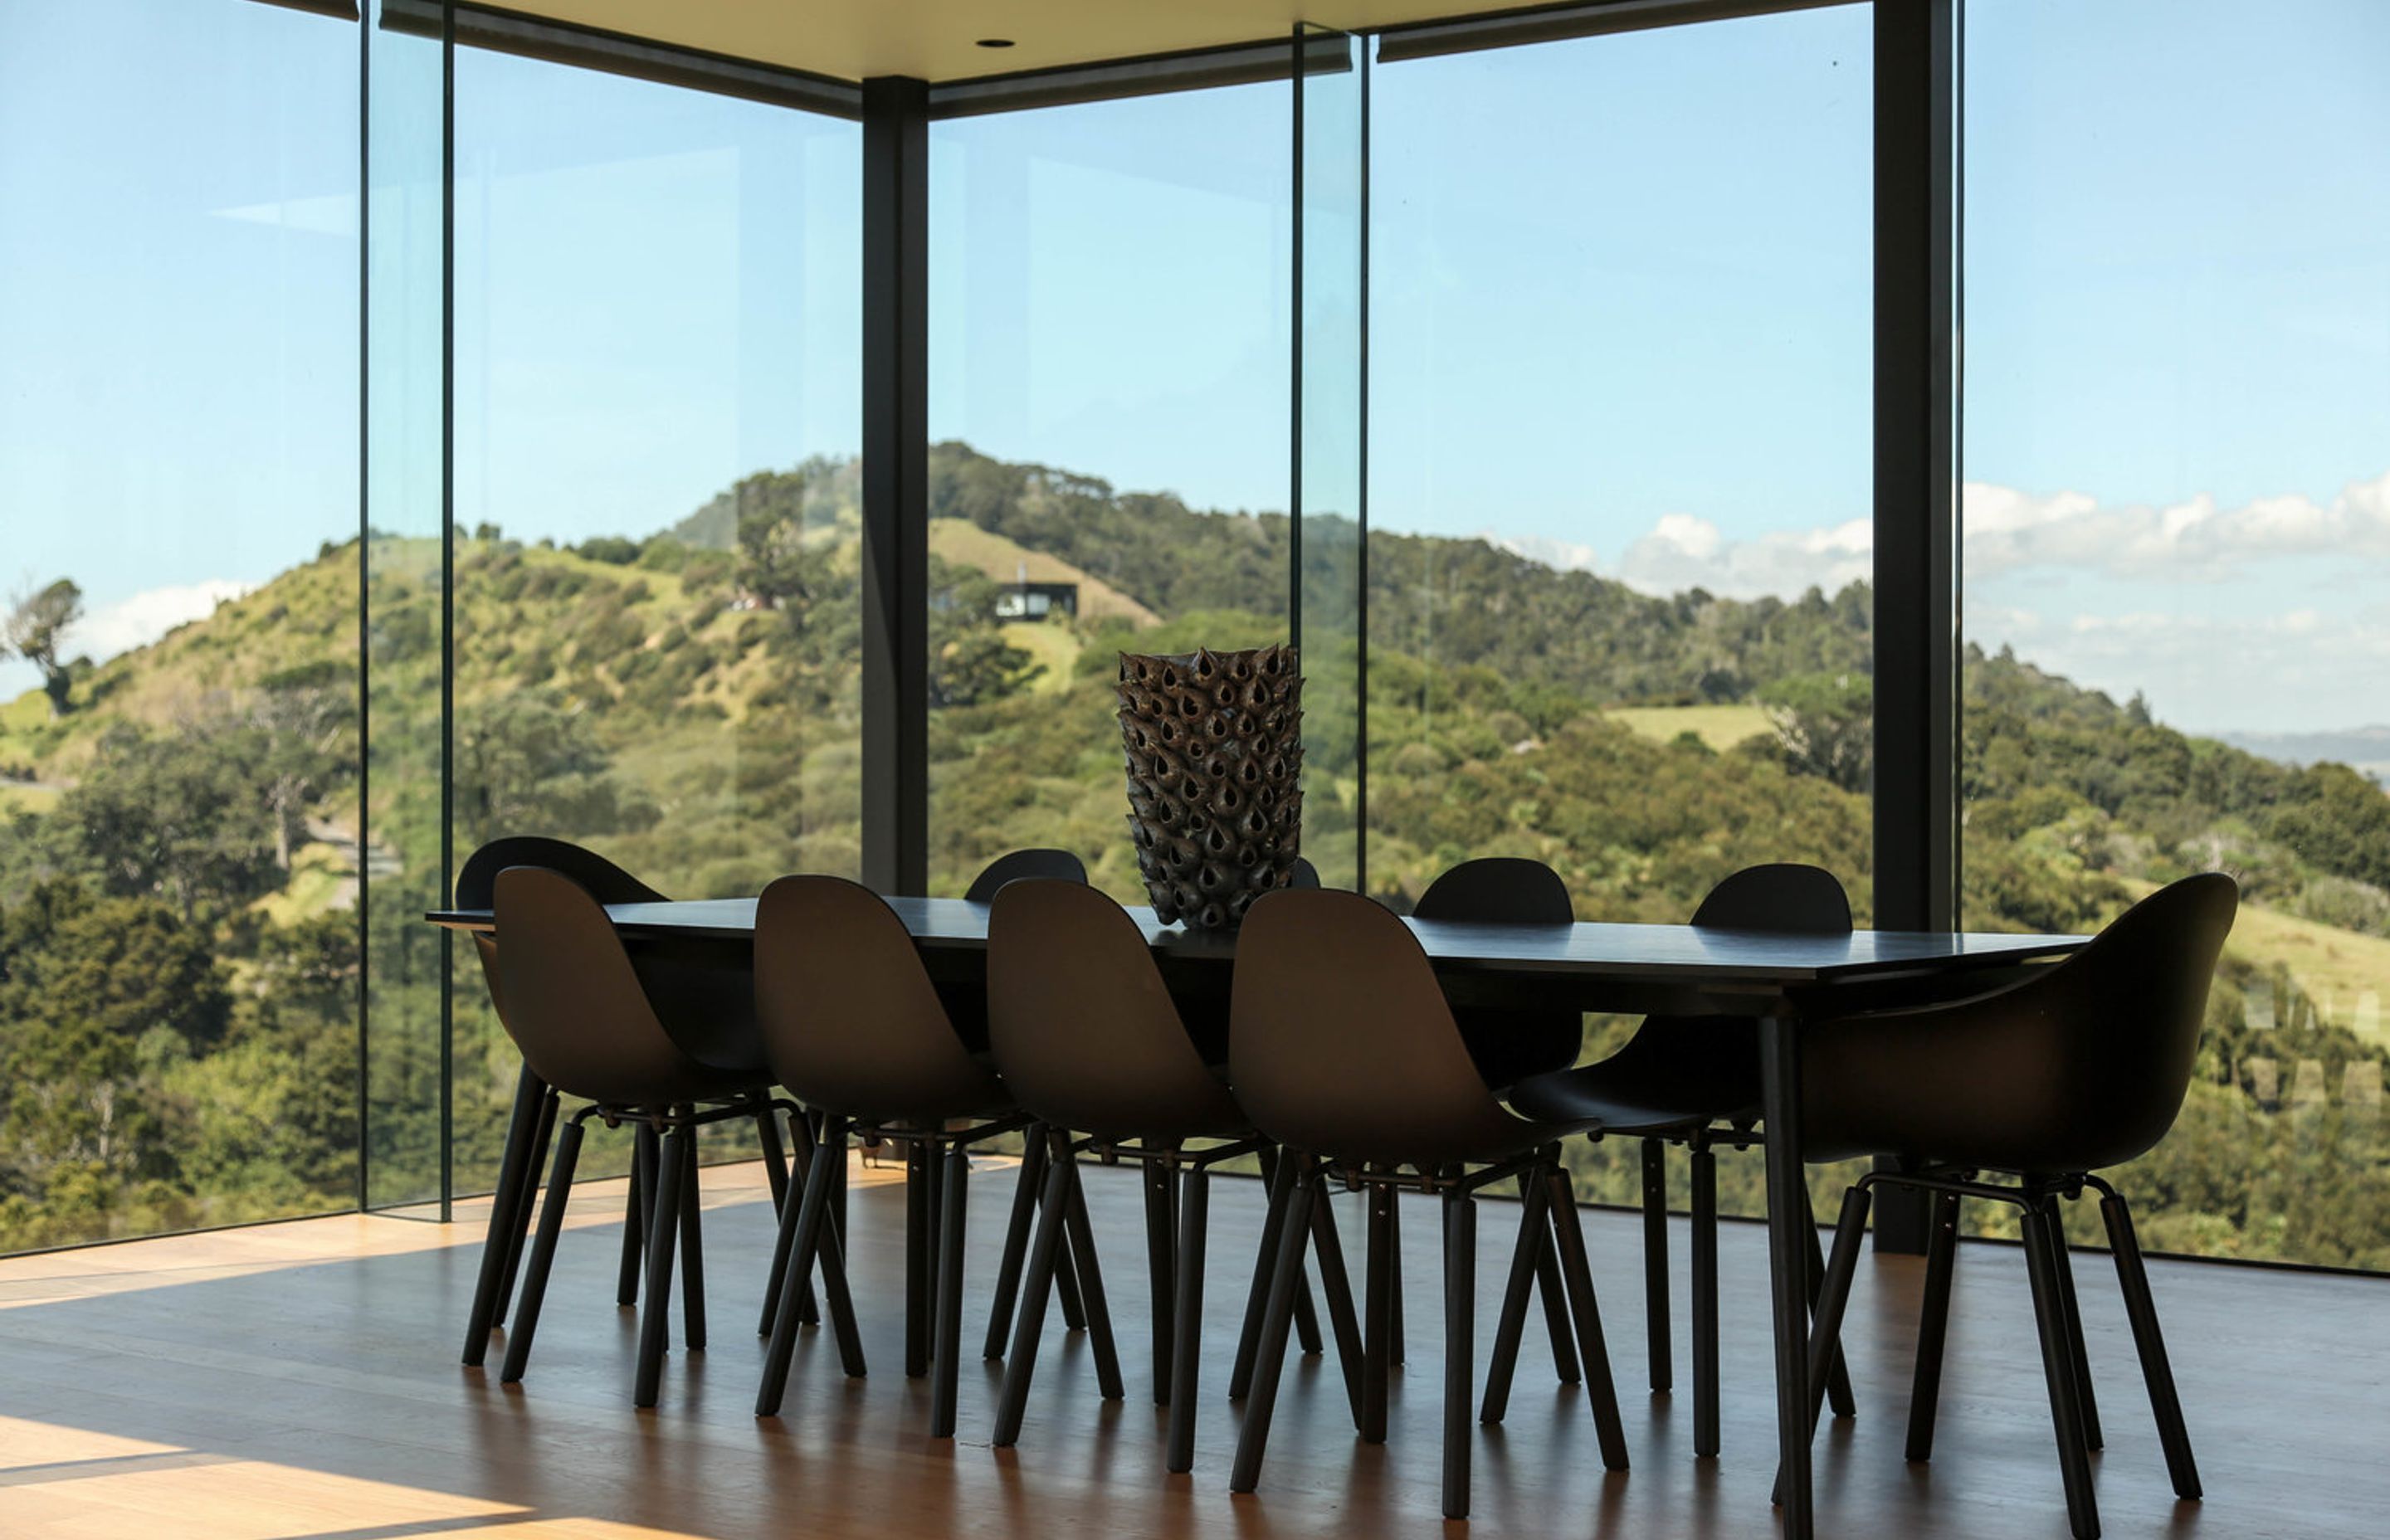 The dining area is fully glazed with views over the surrounding landscape.